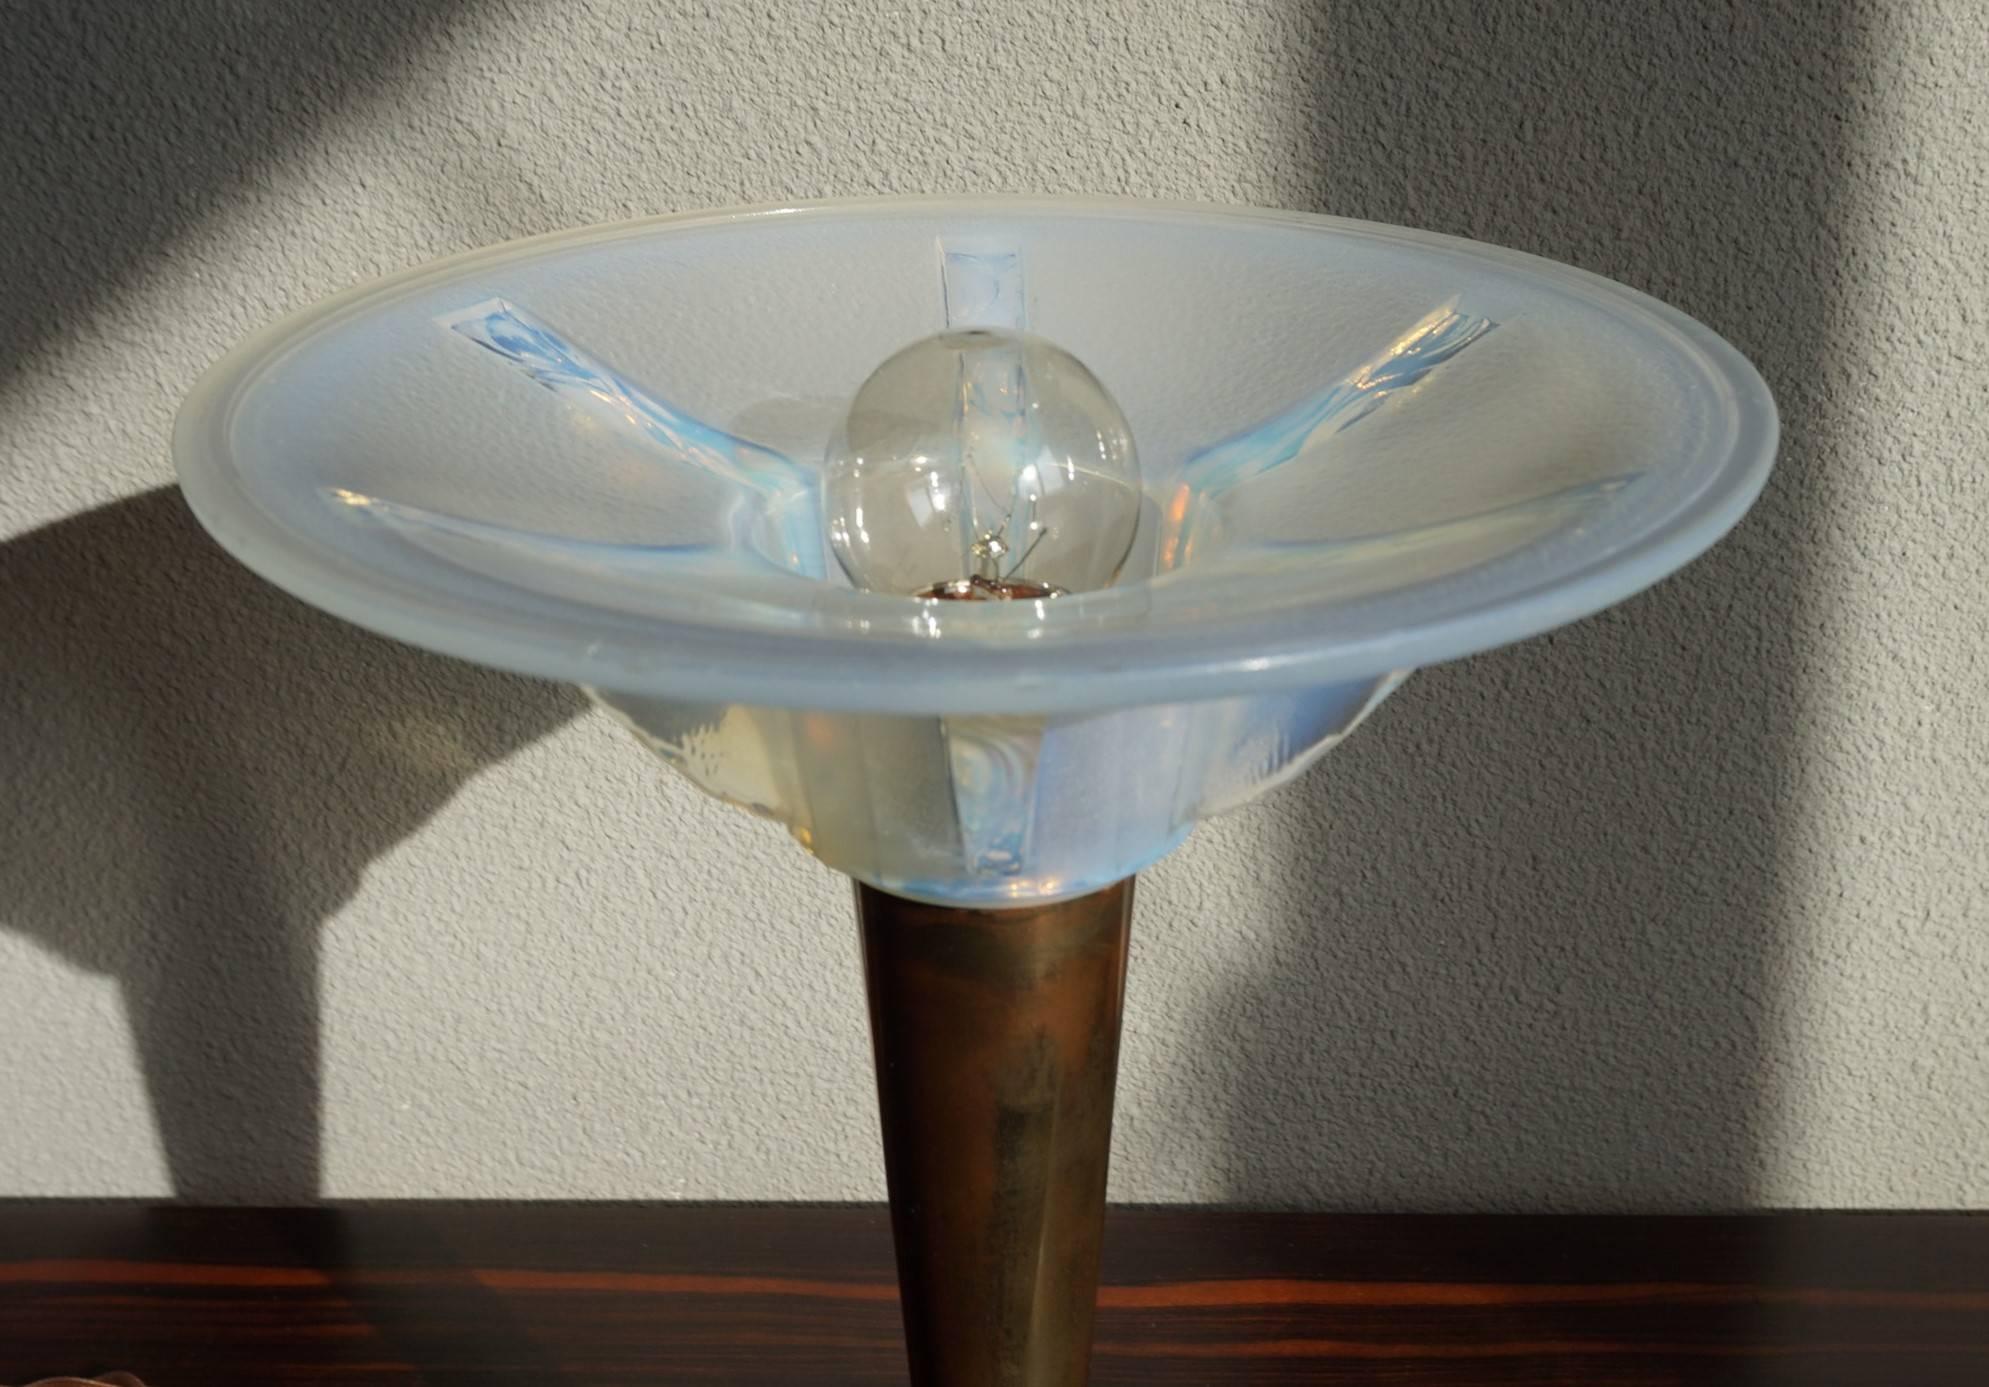 Hand-Crafted Art Deco Table or Desk Lamp with a Lalique Style Iridescent Blue Glass Shade